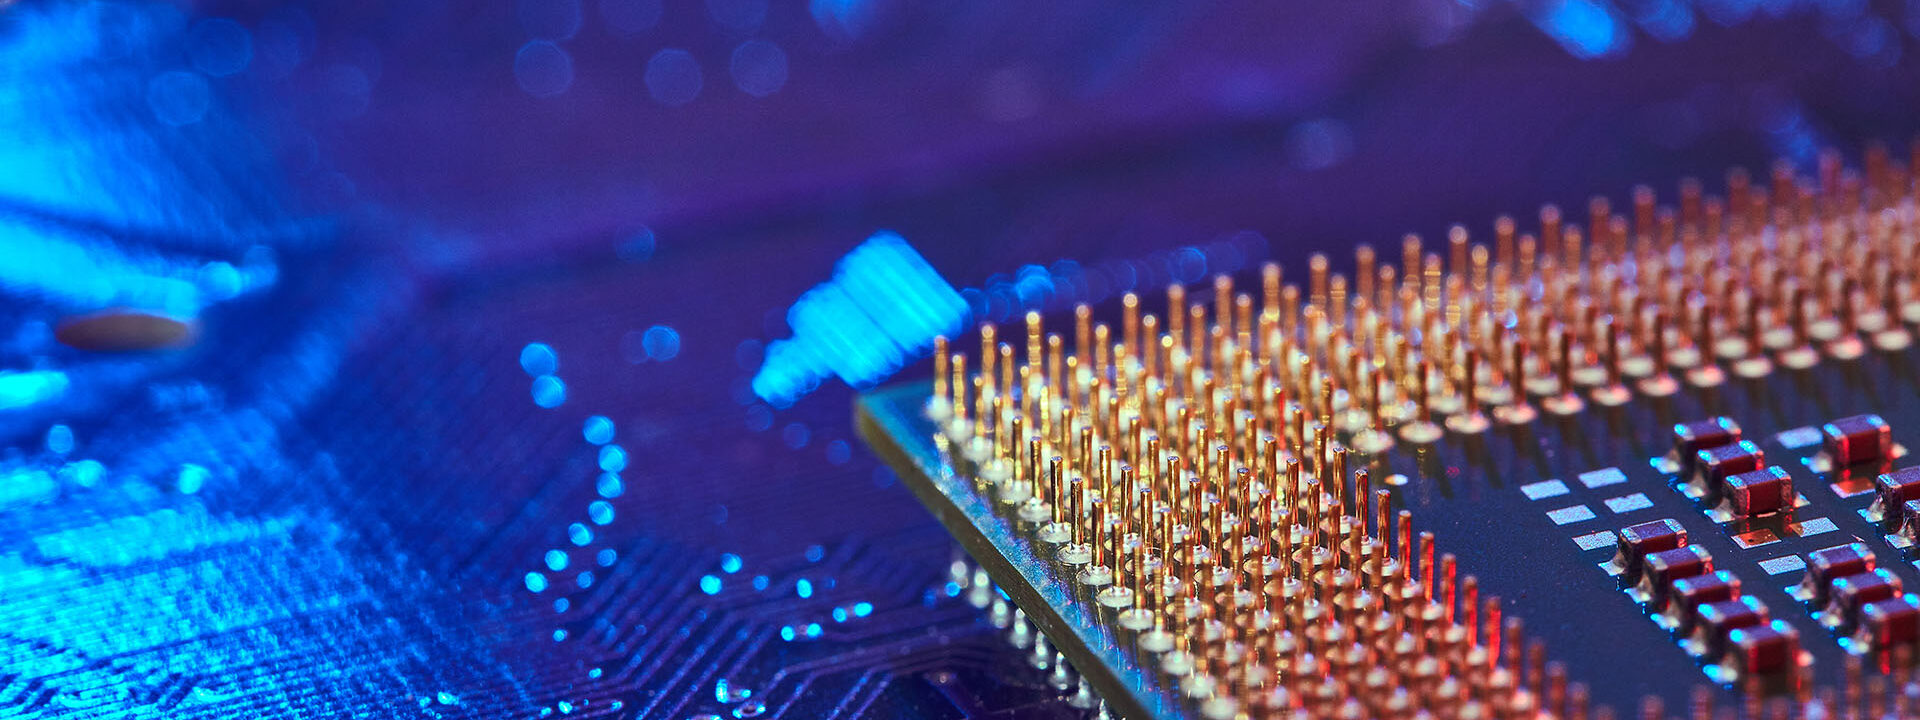 CPU desktop with the contacts facing up lying on the motherboard of the PC. the chip is highlighted with blue light. Technology background